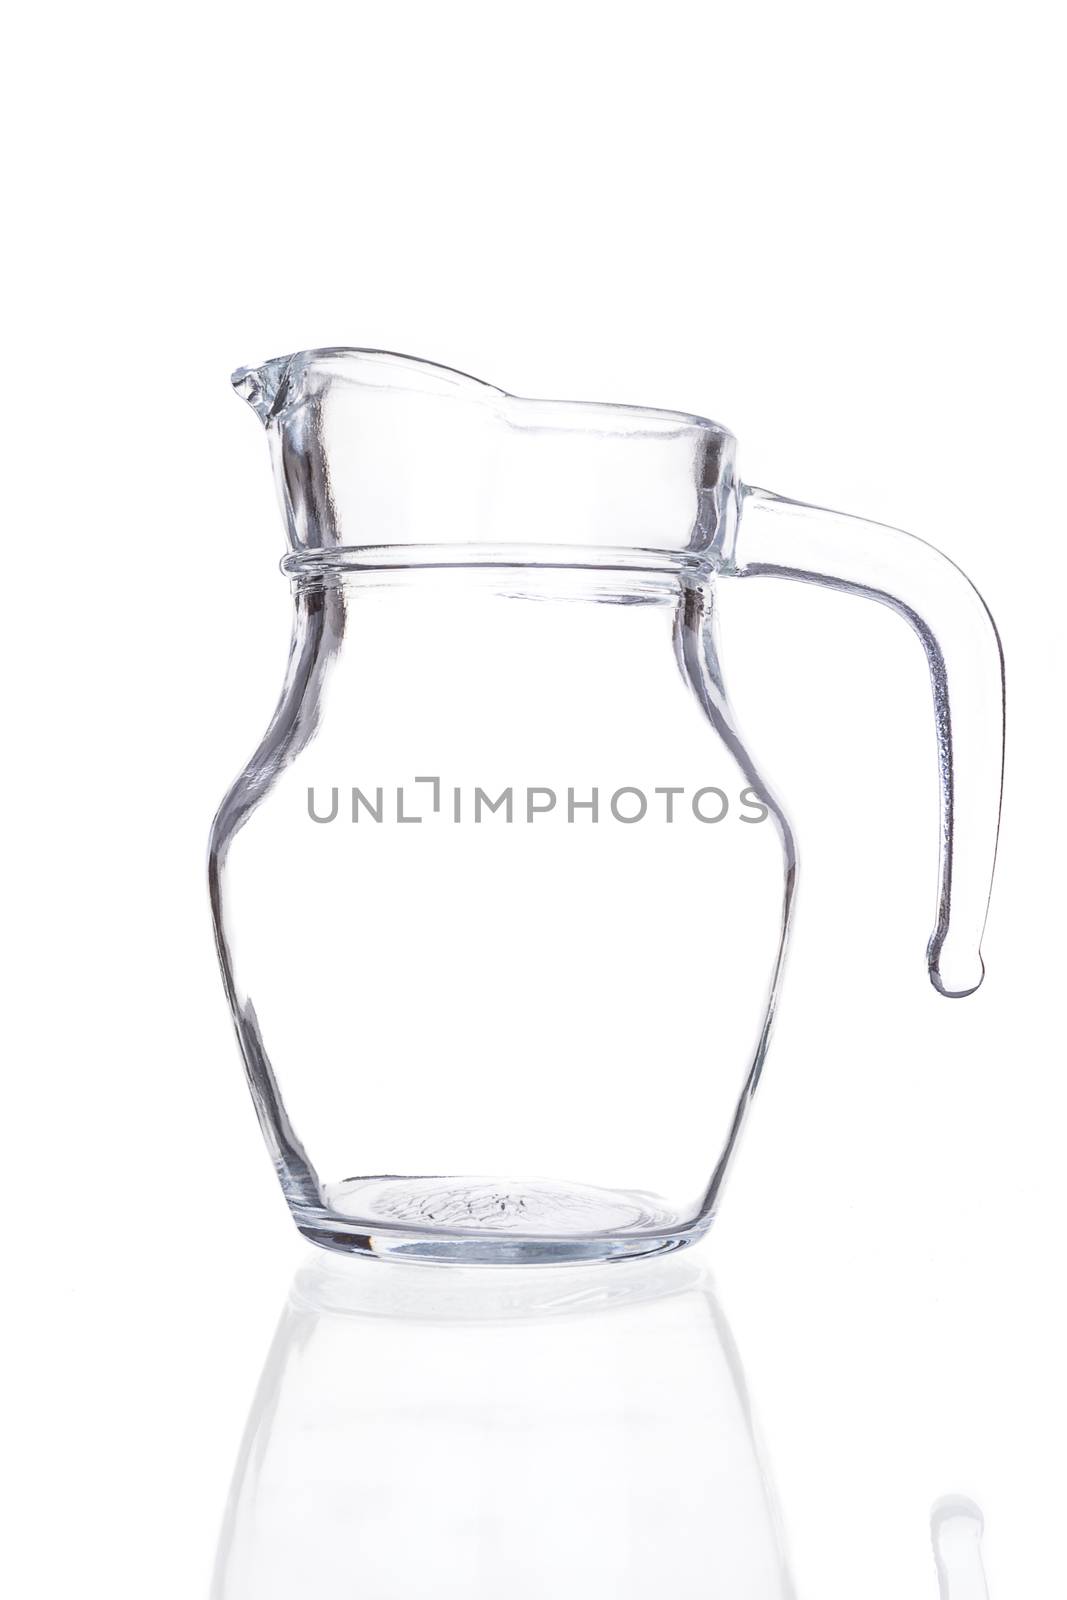 Empty pitcher isolated on a white background.